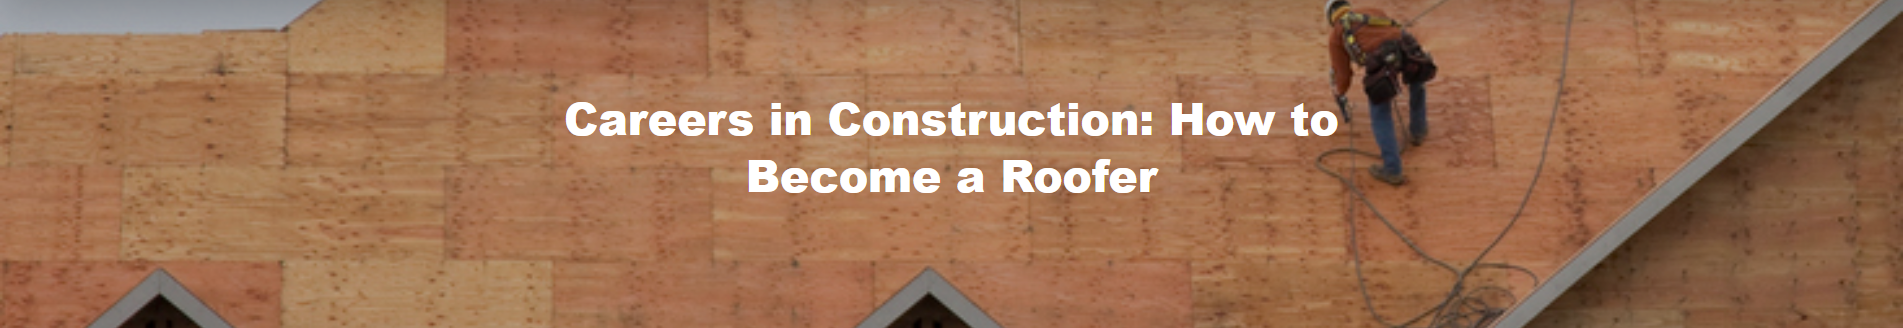 Careers in Construction: How to Become a Roofer